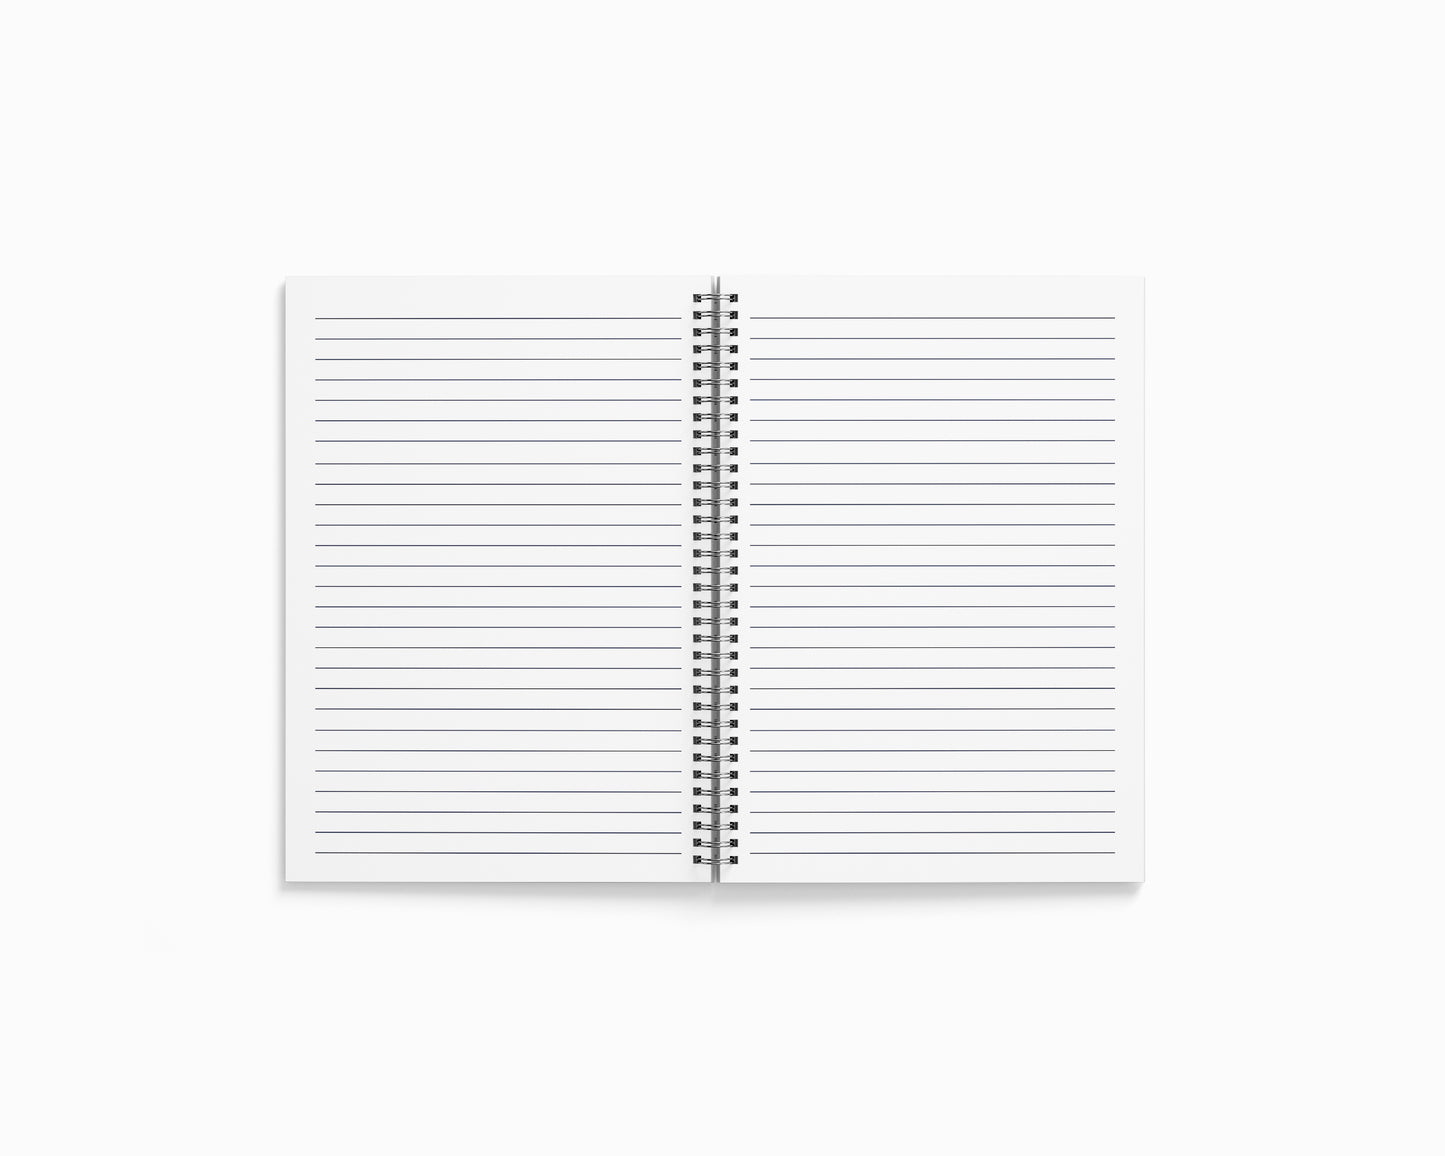 Chinchani Notebook (A5 Size, 100 Pages, Ruled)